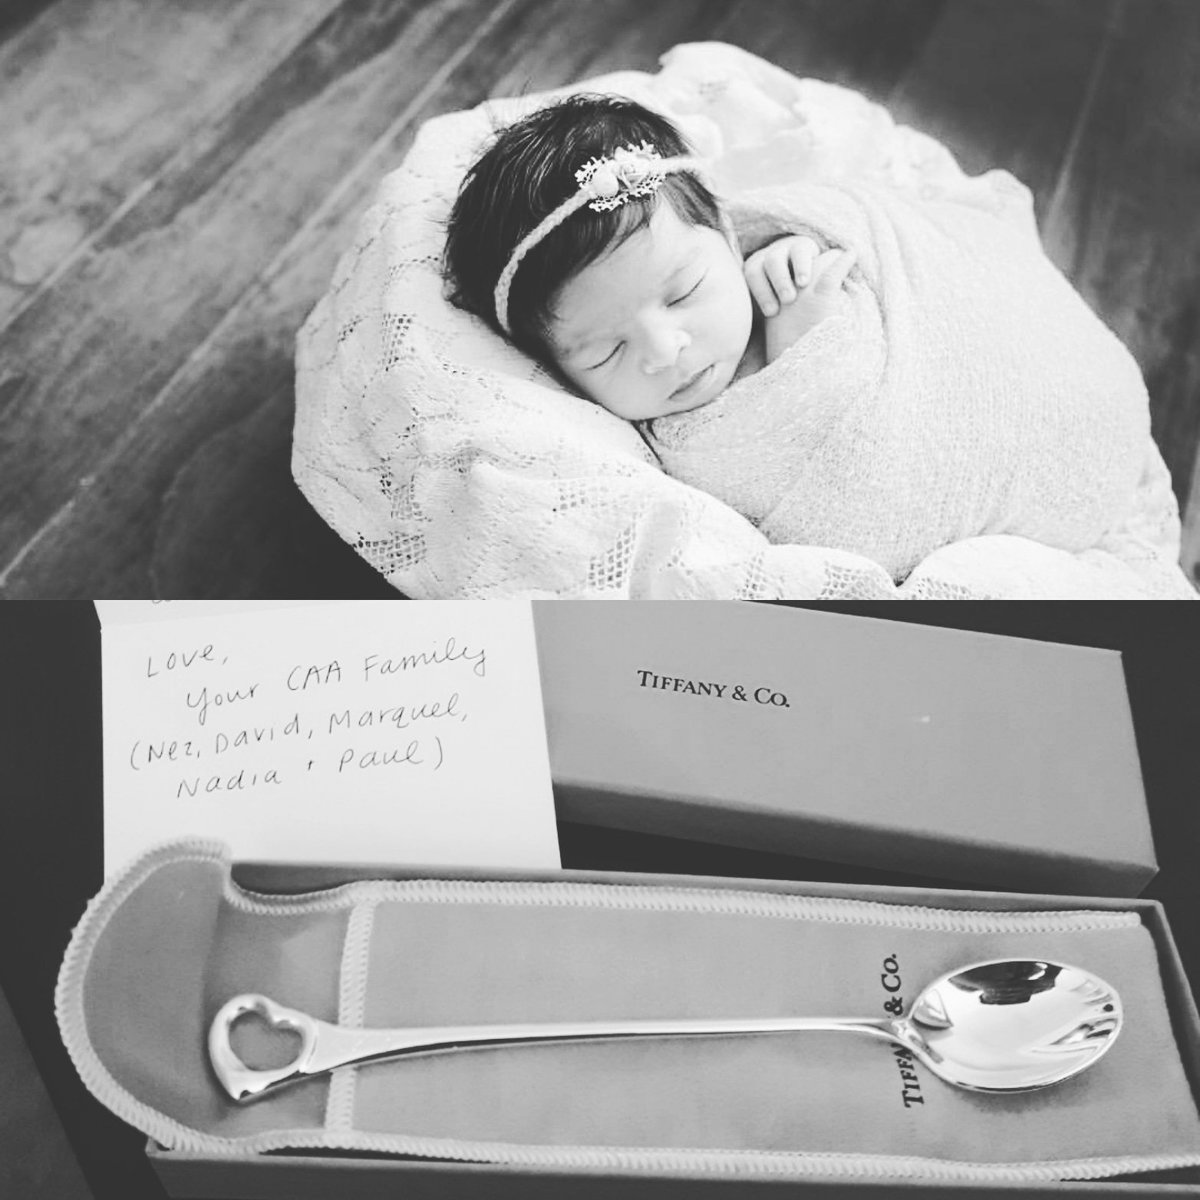 Life's much easier 2 navigate when u have the right people around u. My family and I are truly fortunate 2 have the team from CAA by our side. The little things count, like sending a customized silver spoon for ur newborn. A fitting gift for a princess! #family #TeamBhullar